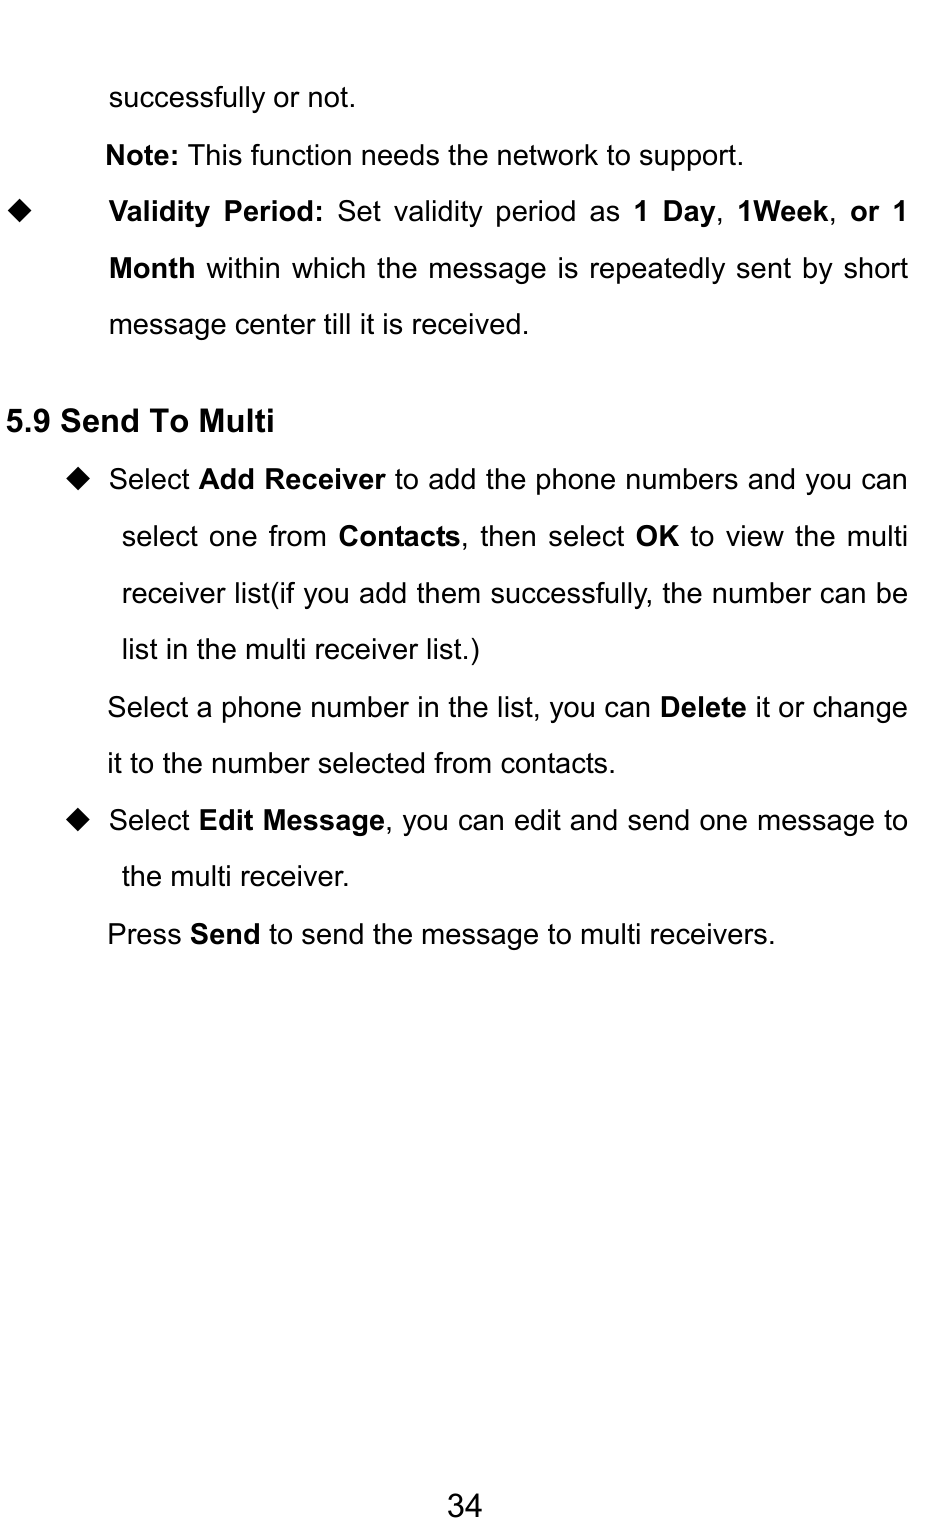                                     34successfully or not.   Note: This function needs the network to support.        Validity Period: Set validity period as 1 Day, 1Week, or 1 Month within which the message is repeatedly sent by short message center till it is received. 5.9 Send To Multi  Select Add Receiver to add the phone numbers and you can select one from Contacts, then select OK to view the multi receiver list(if you add them successfully, the number can be list in the multi receiver list.)   Select a phone number in the list, you can Delete it or change it to the number selected from contacts.  Select Edit Message, you can edit and send one message to the multi receiver. Press Send to send the message to multi receivers.        